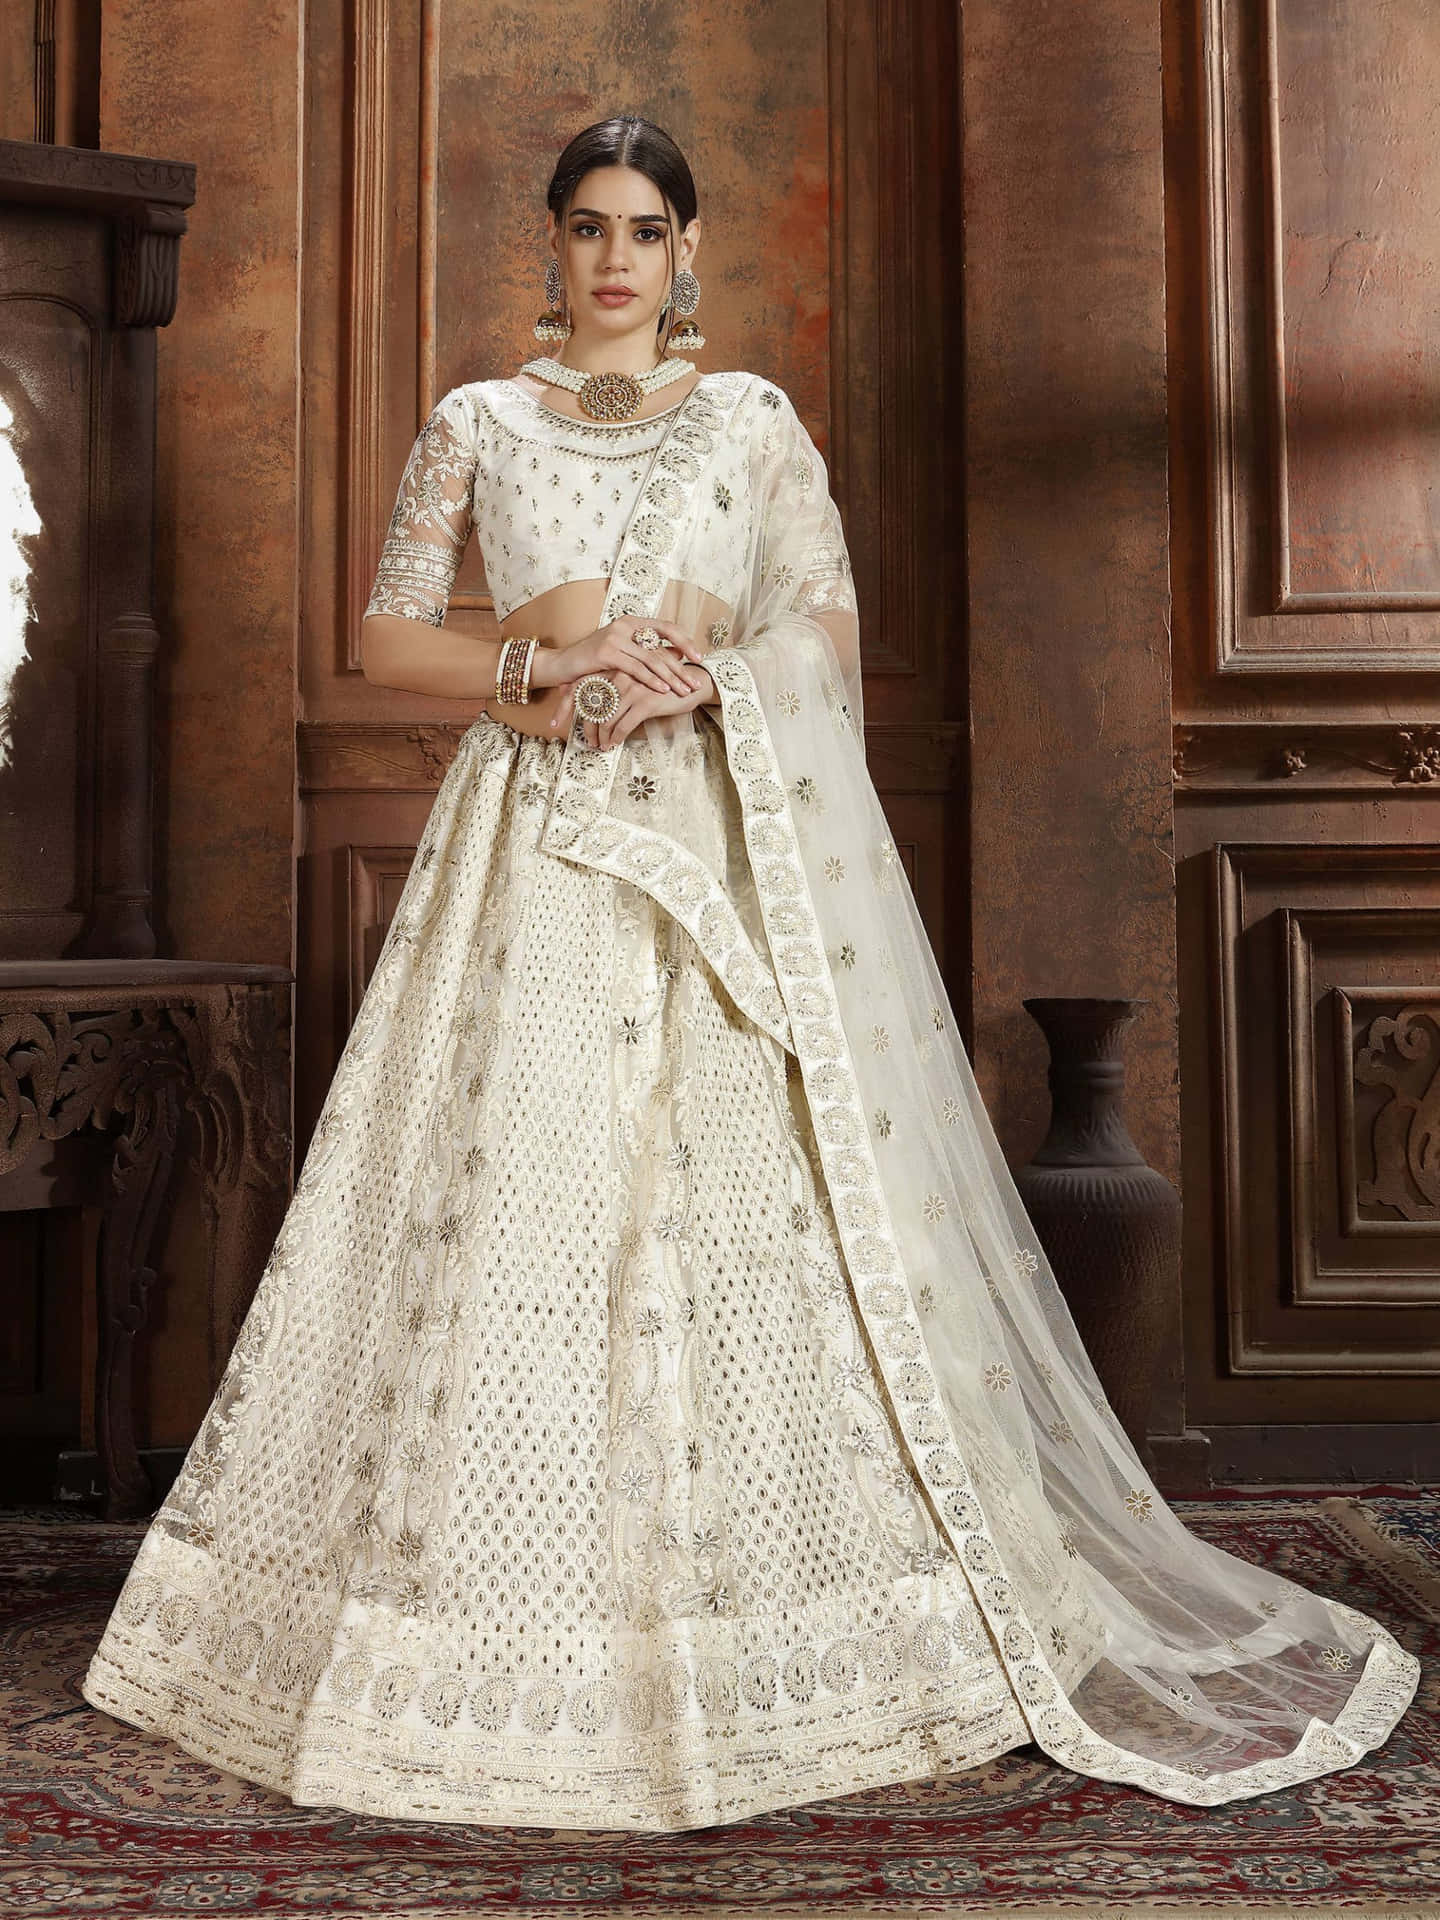 Indian Bride White Simple Dress Picture